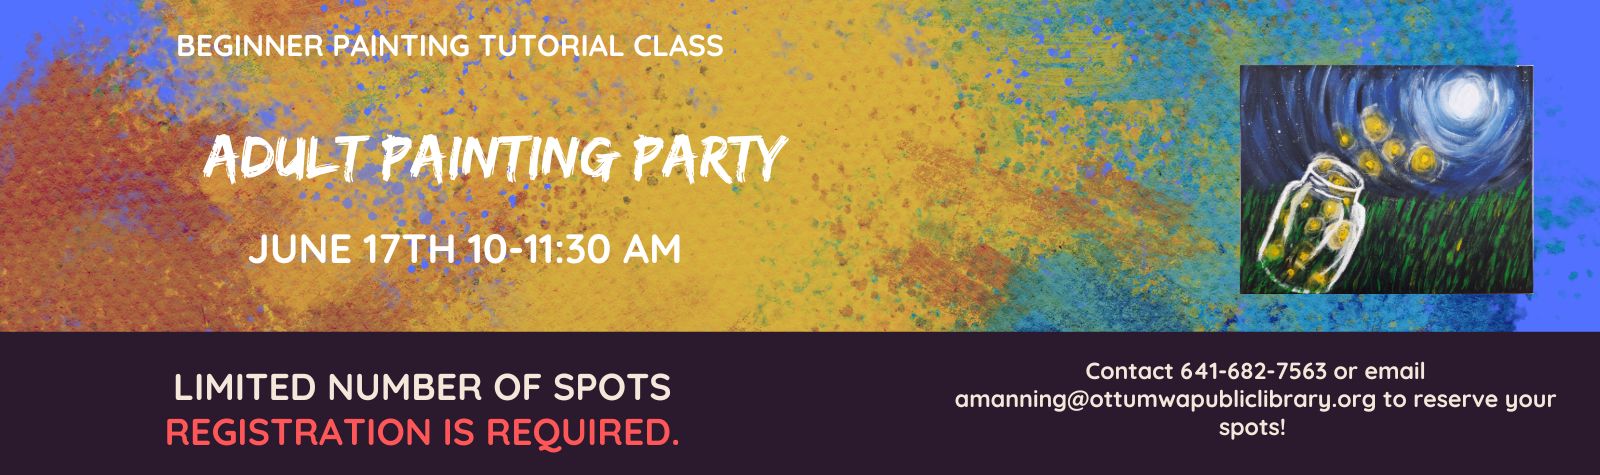 Adult Painting Party: June 17th